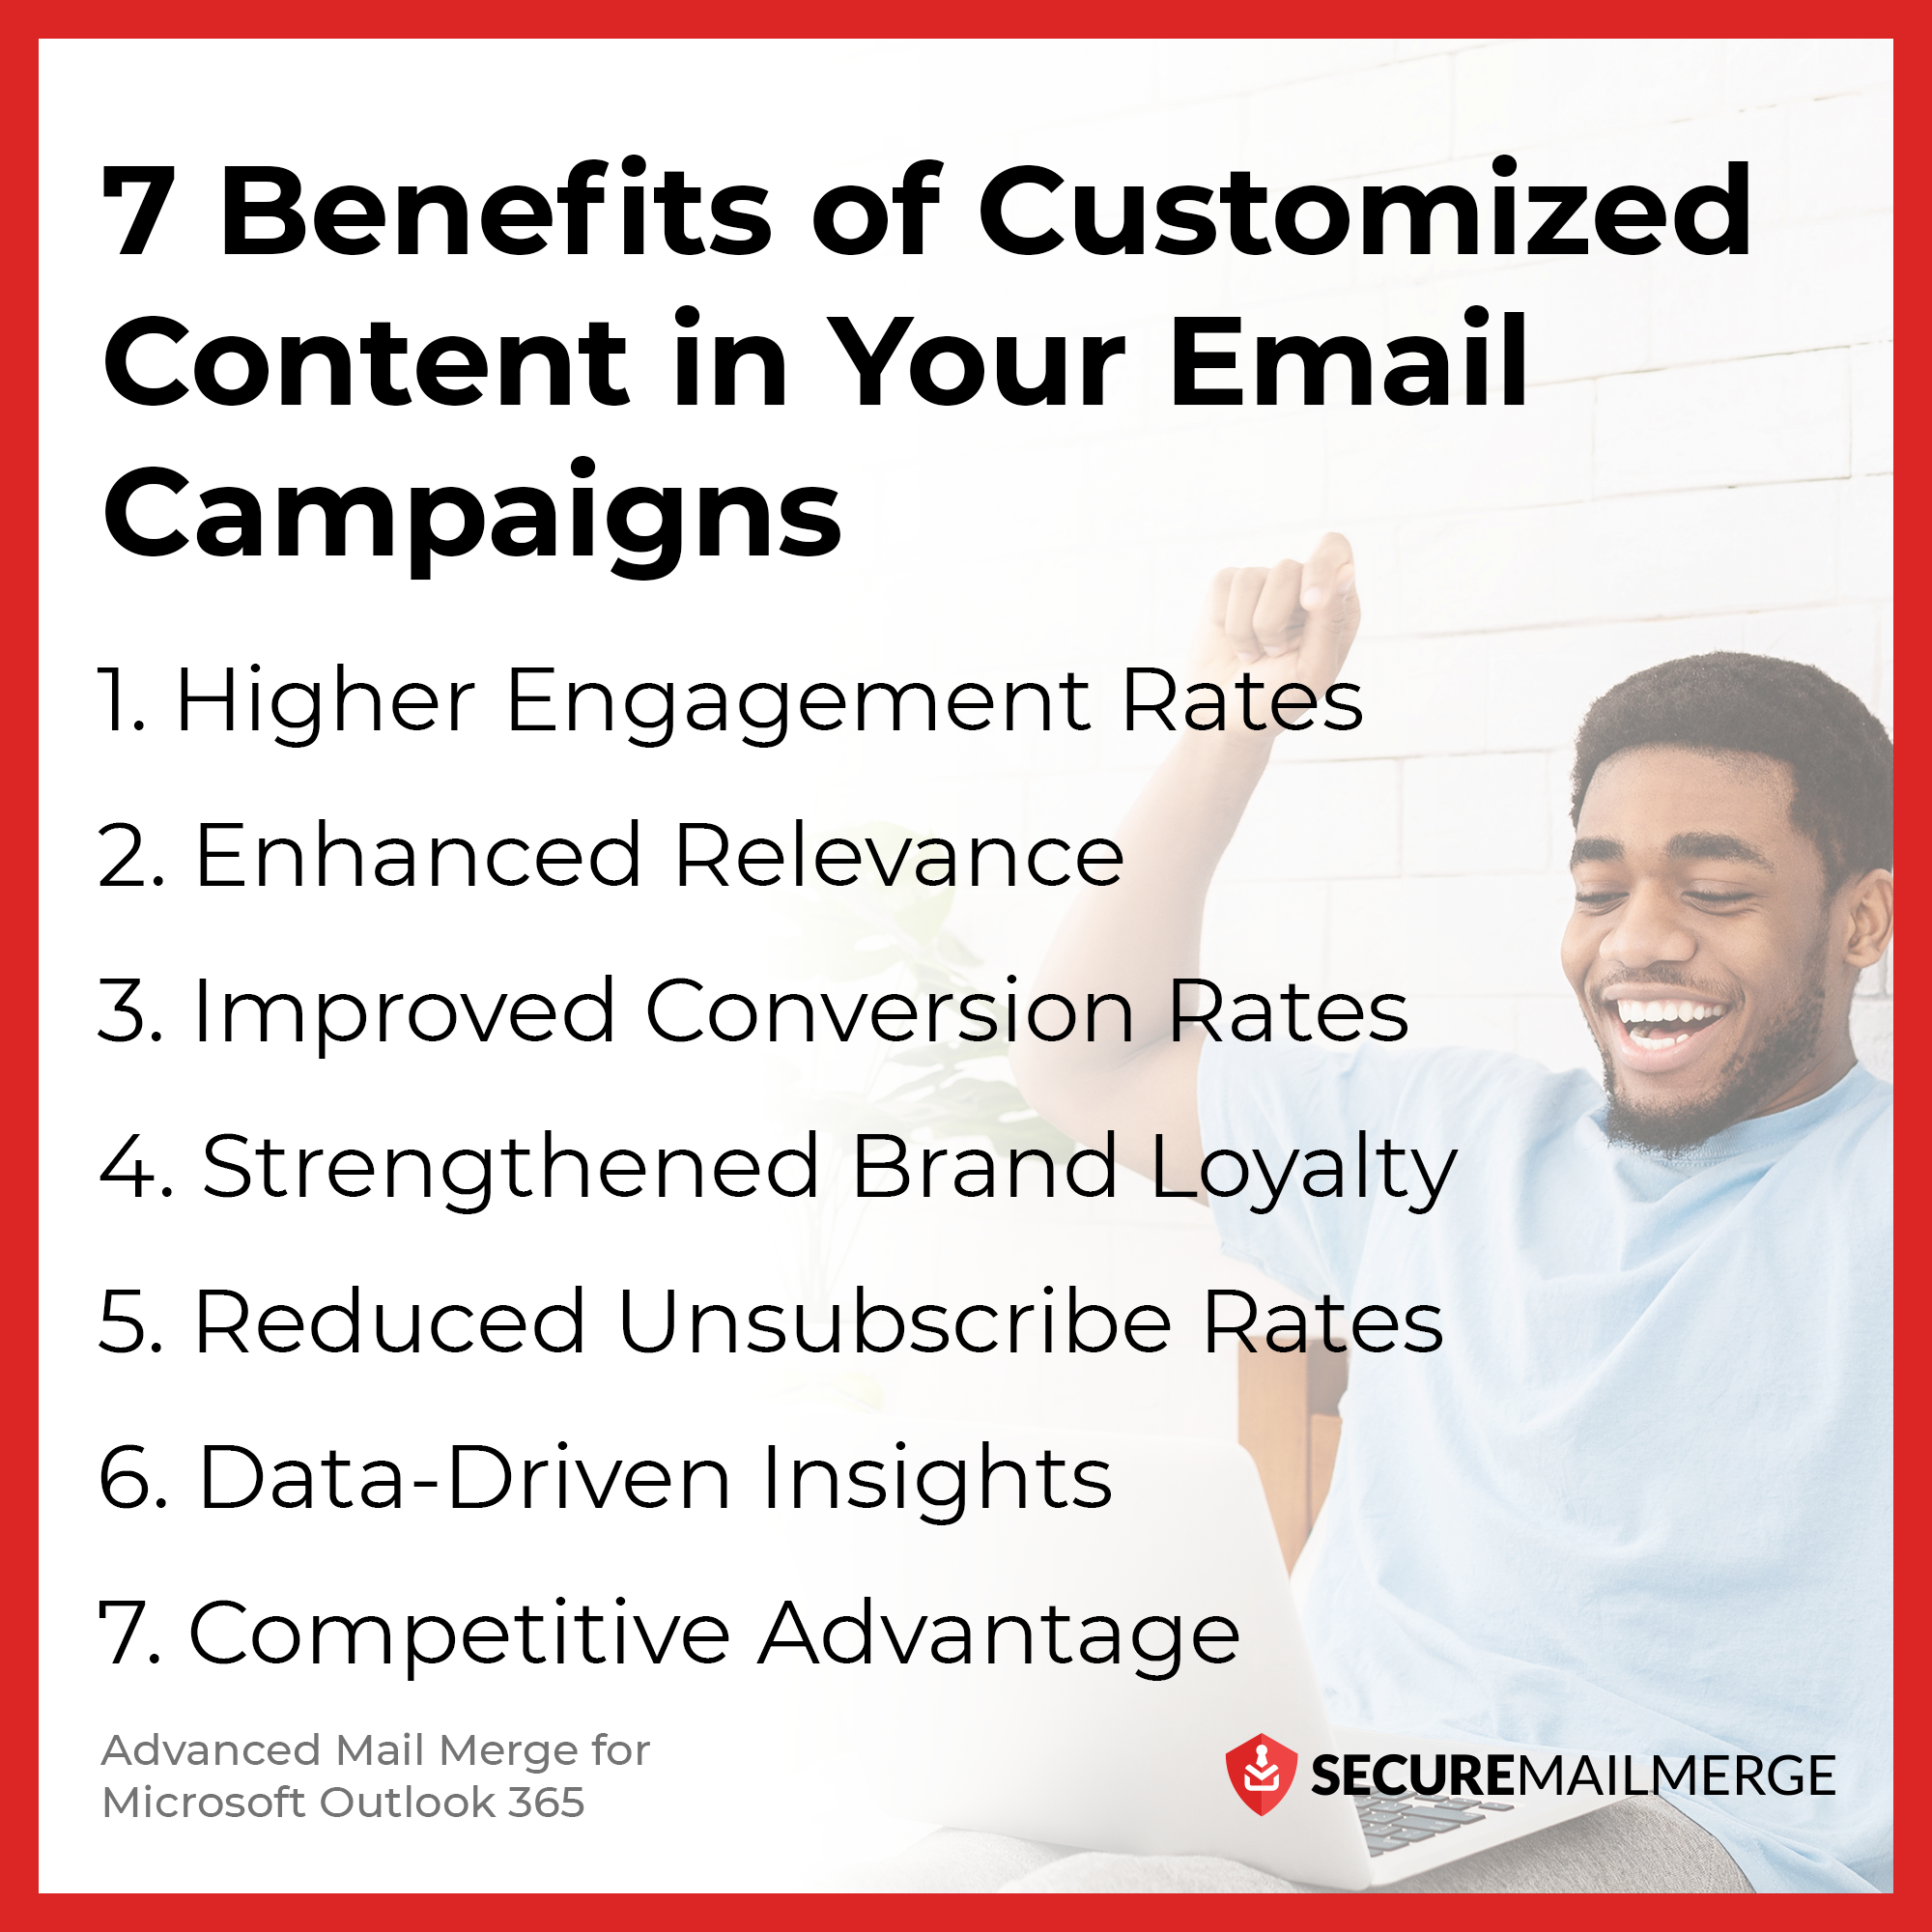 7 Benefits of Customized Content in Your Email Campaigns